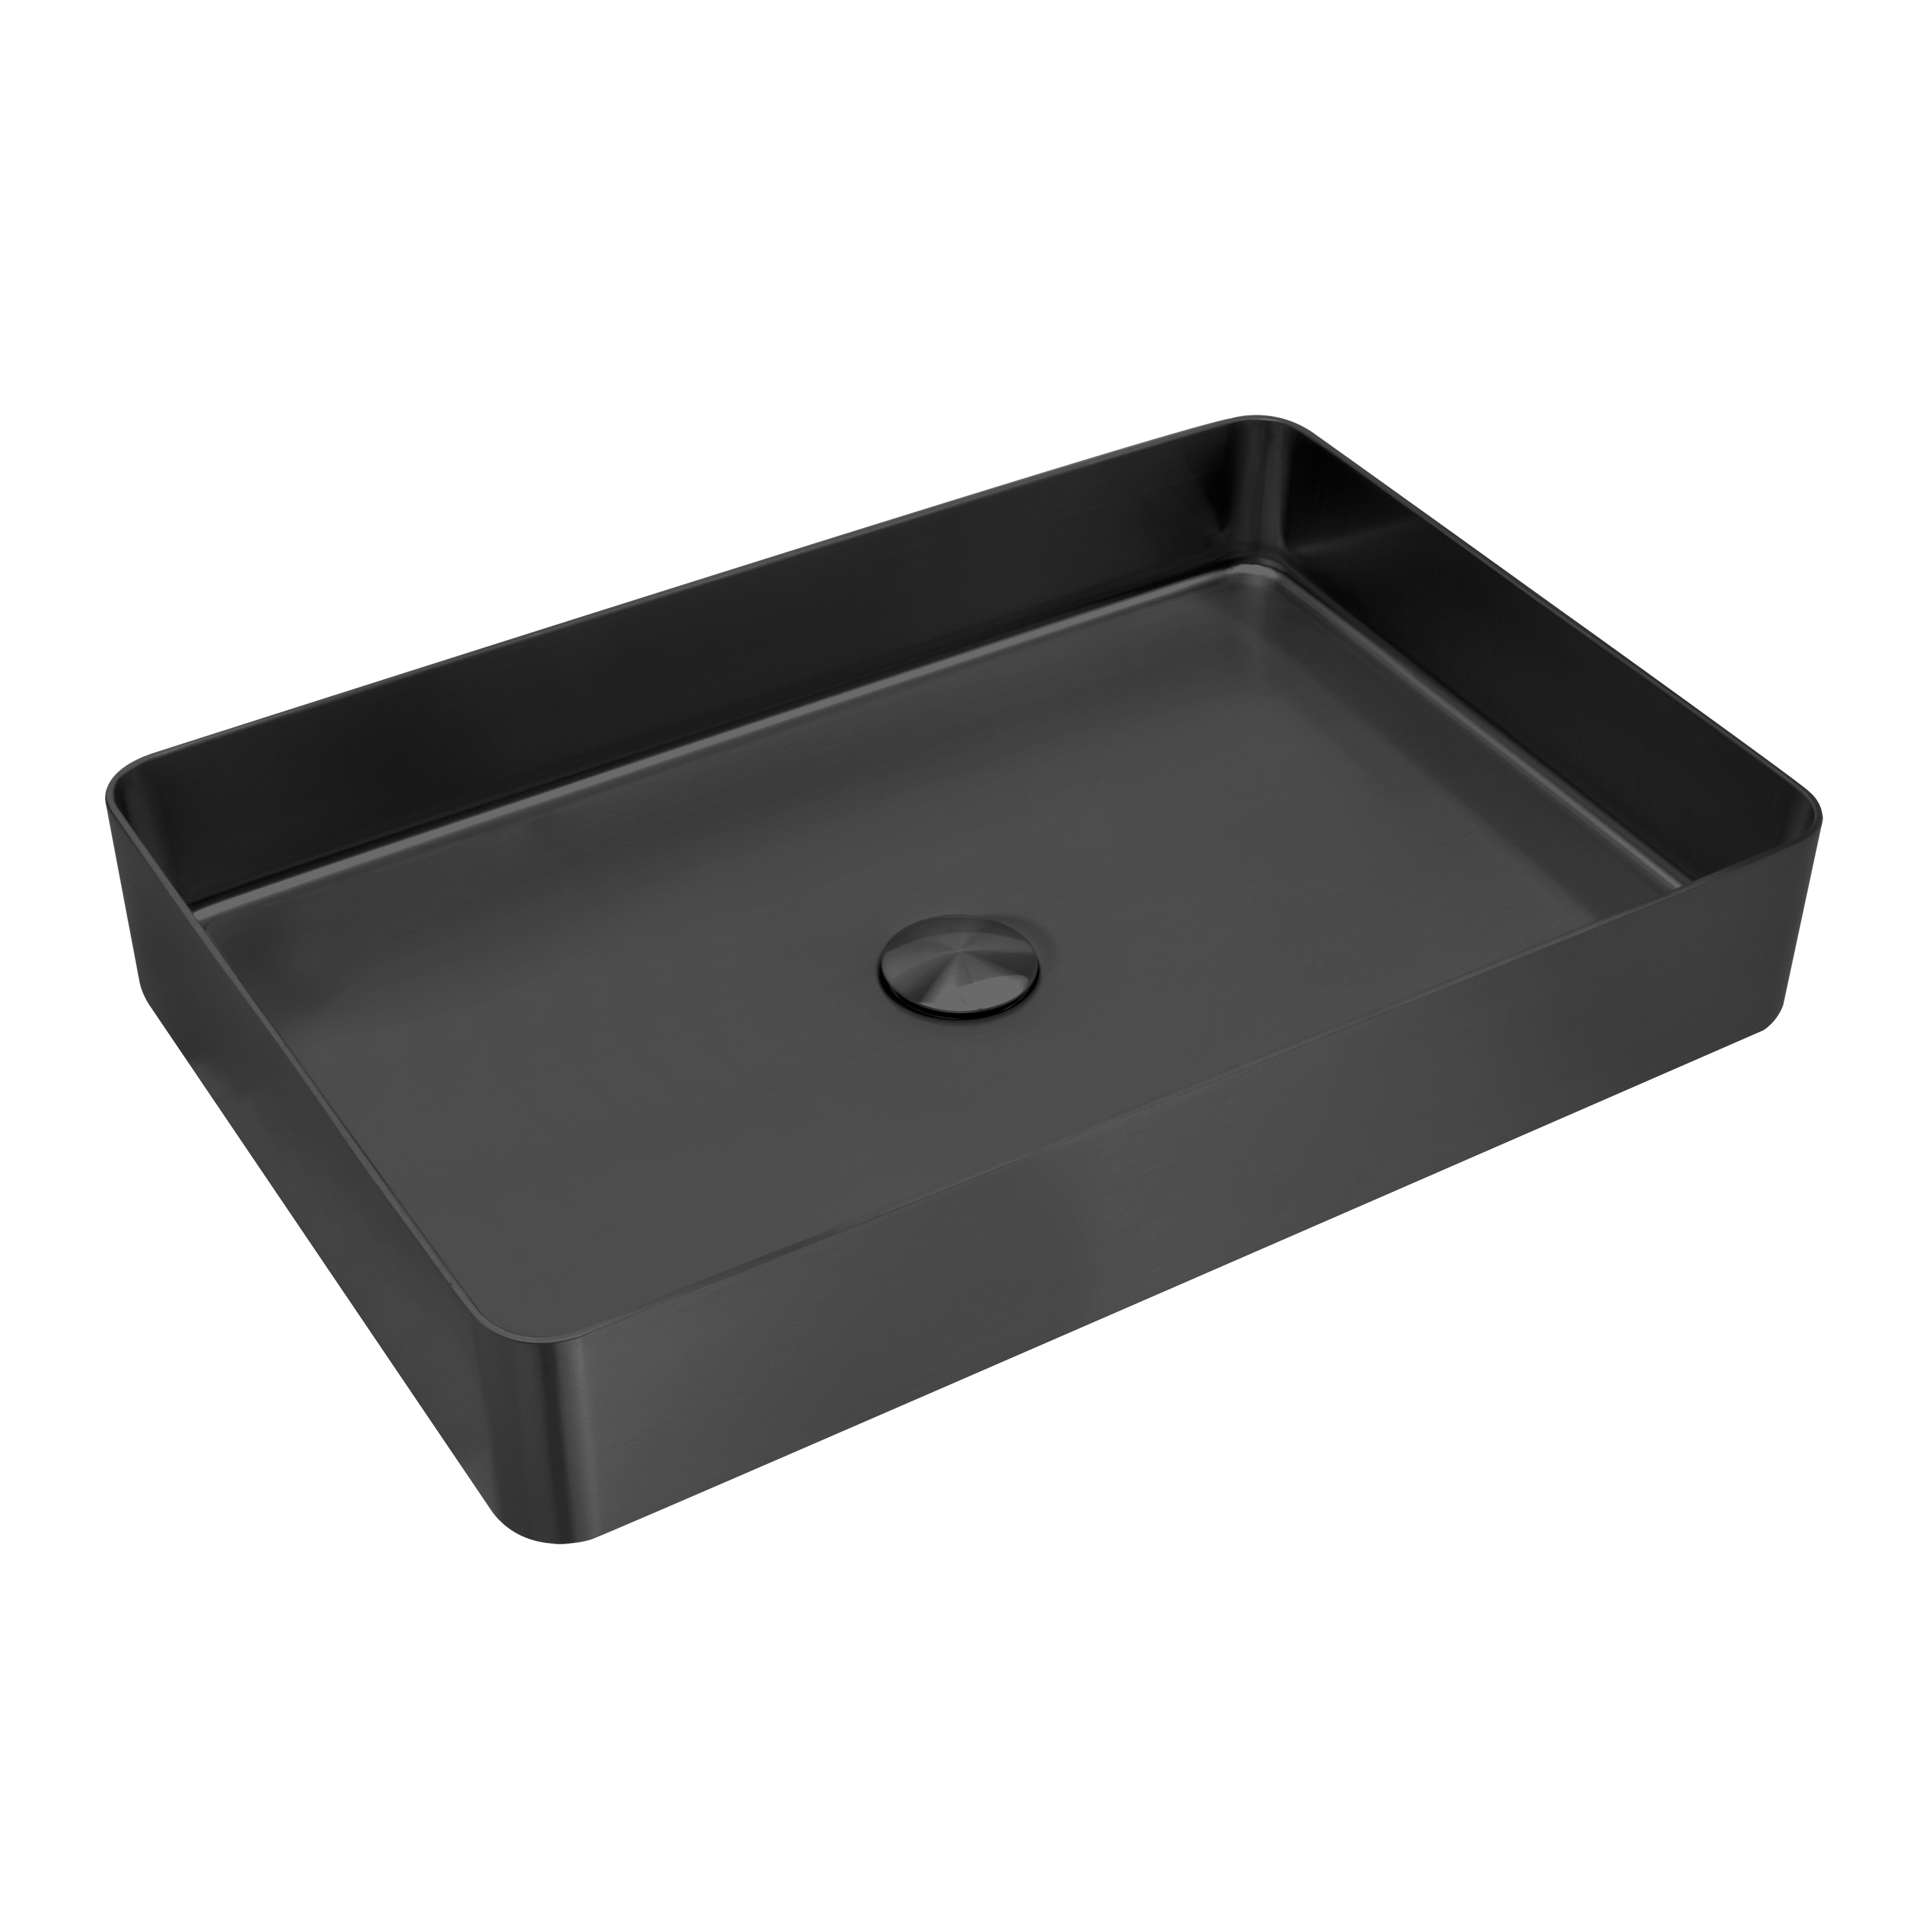 FUSION RECTANGLE STAINLESS STEEL BASINS